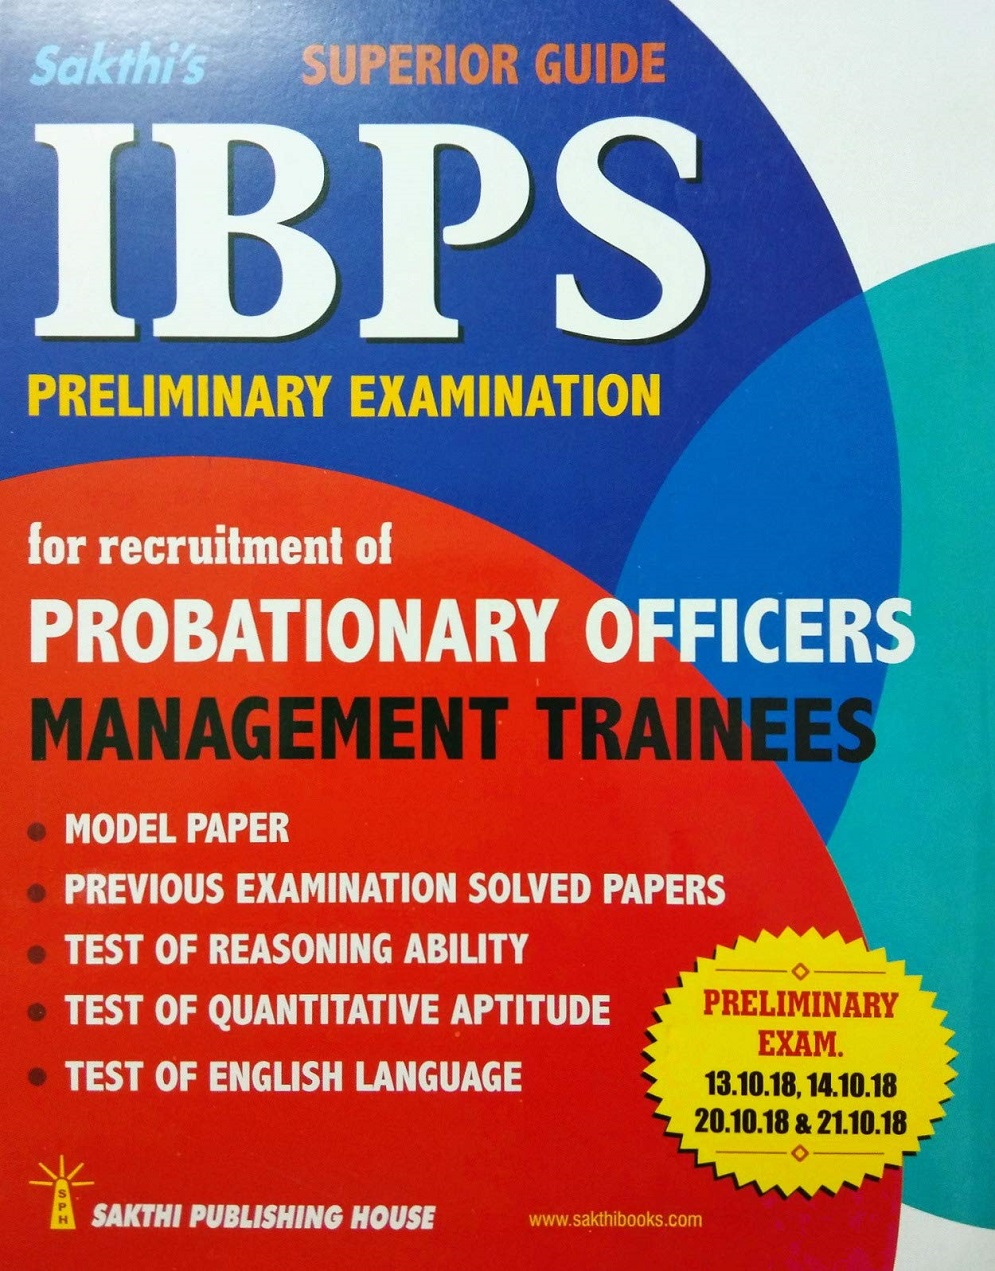 Buy IBPS Preliminary Examination Guide For Recruitment Of PROBATIONARY OFFICERS MANAGEMENT